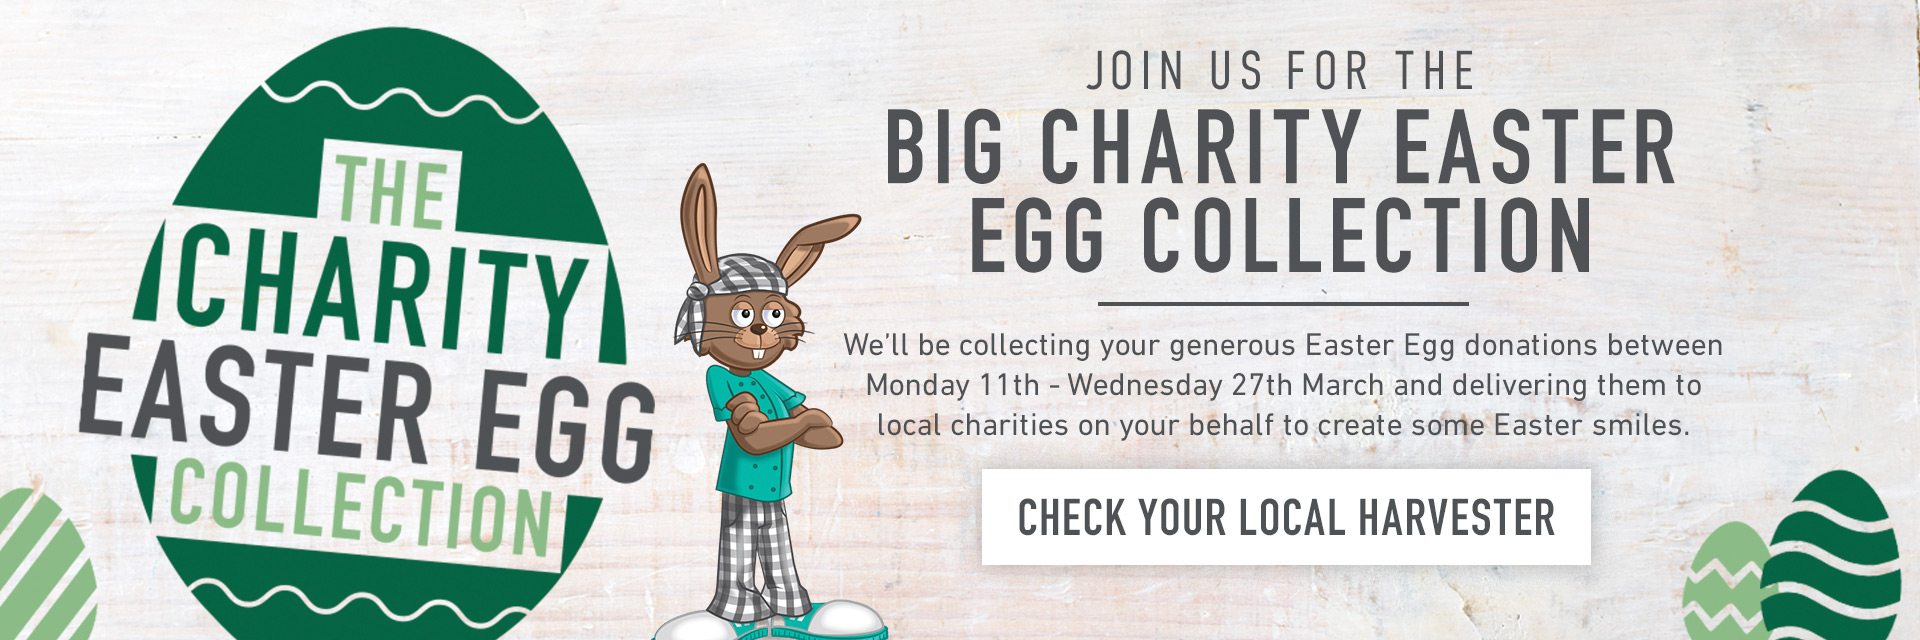 Easter Egg Collection at Harvester Clifton Moor 